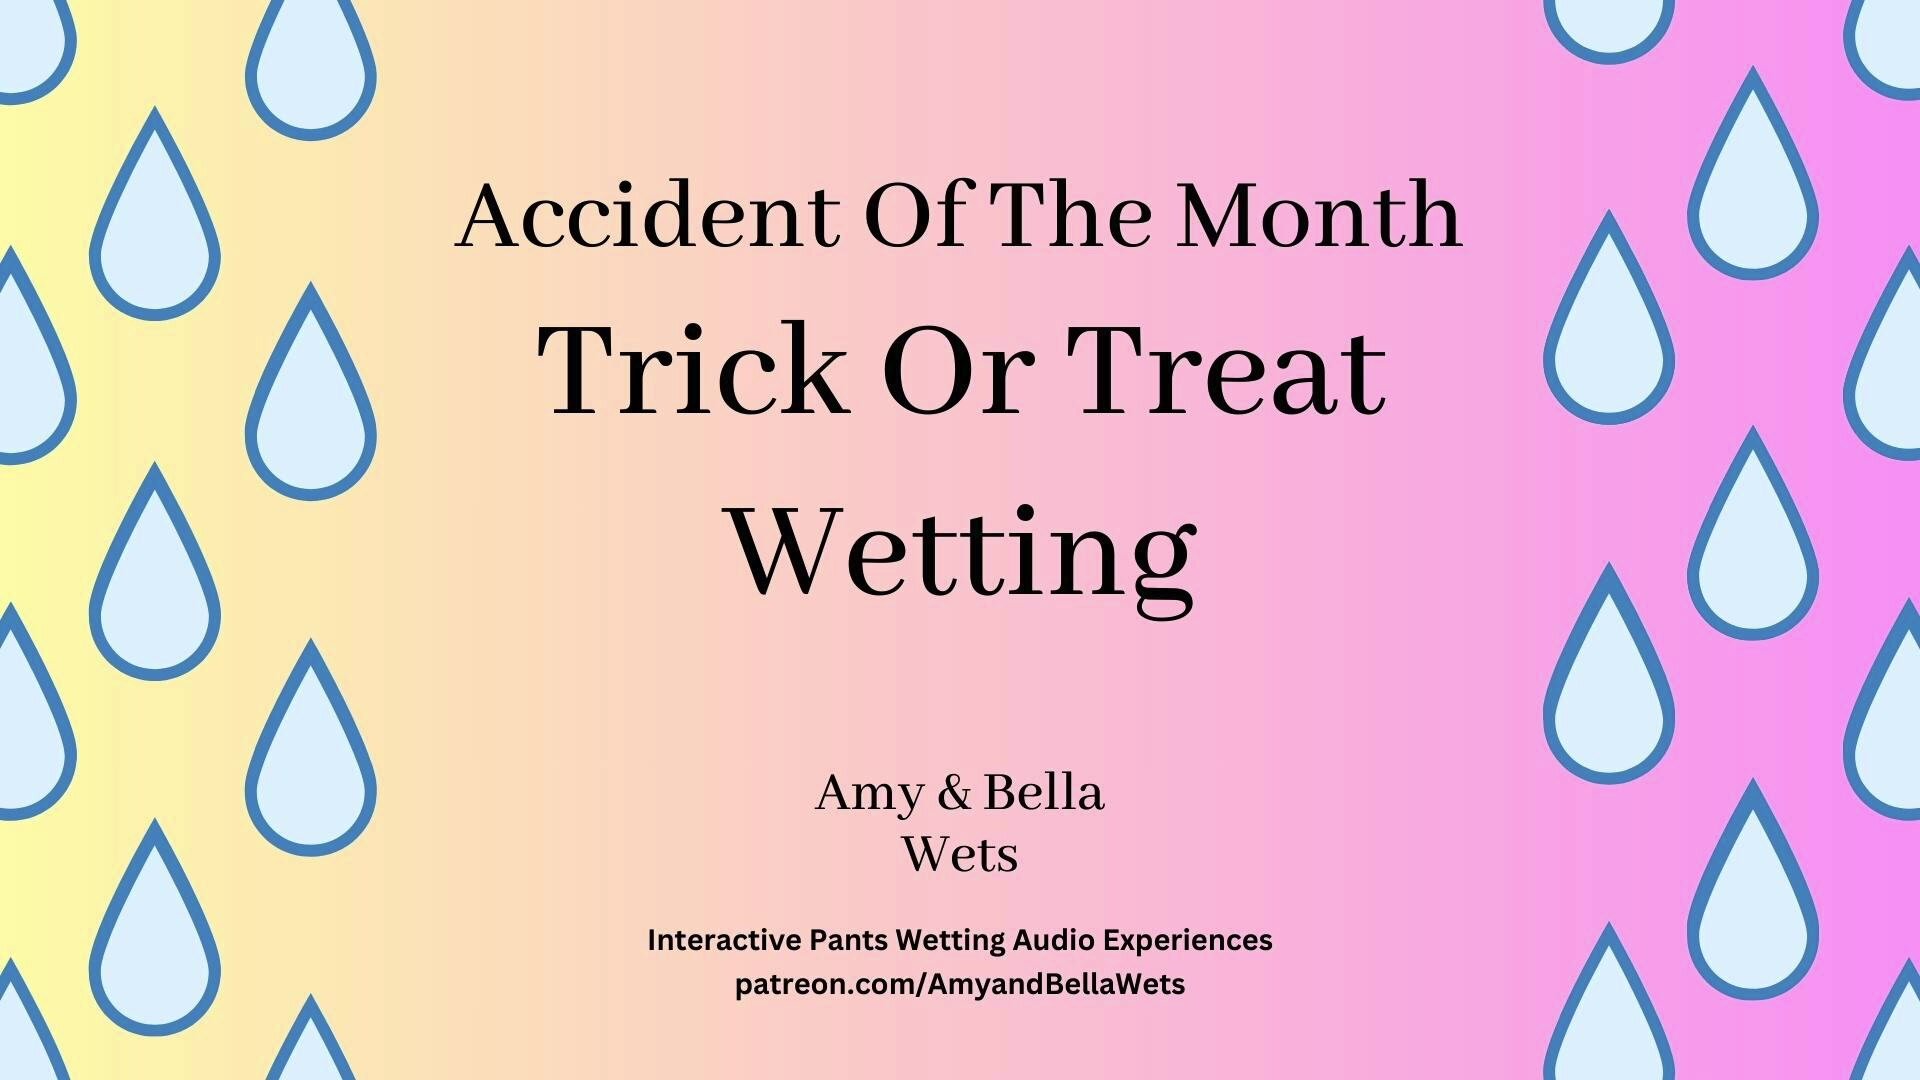 Accident Of The Month - Trick Or Treat Wetting